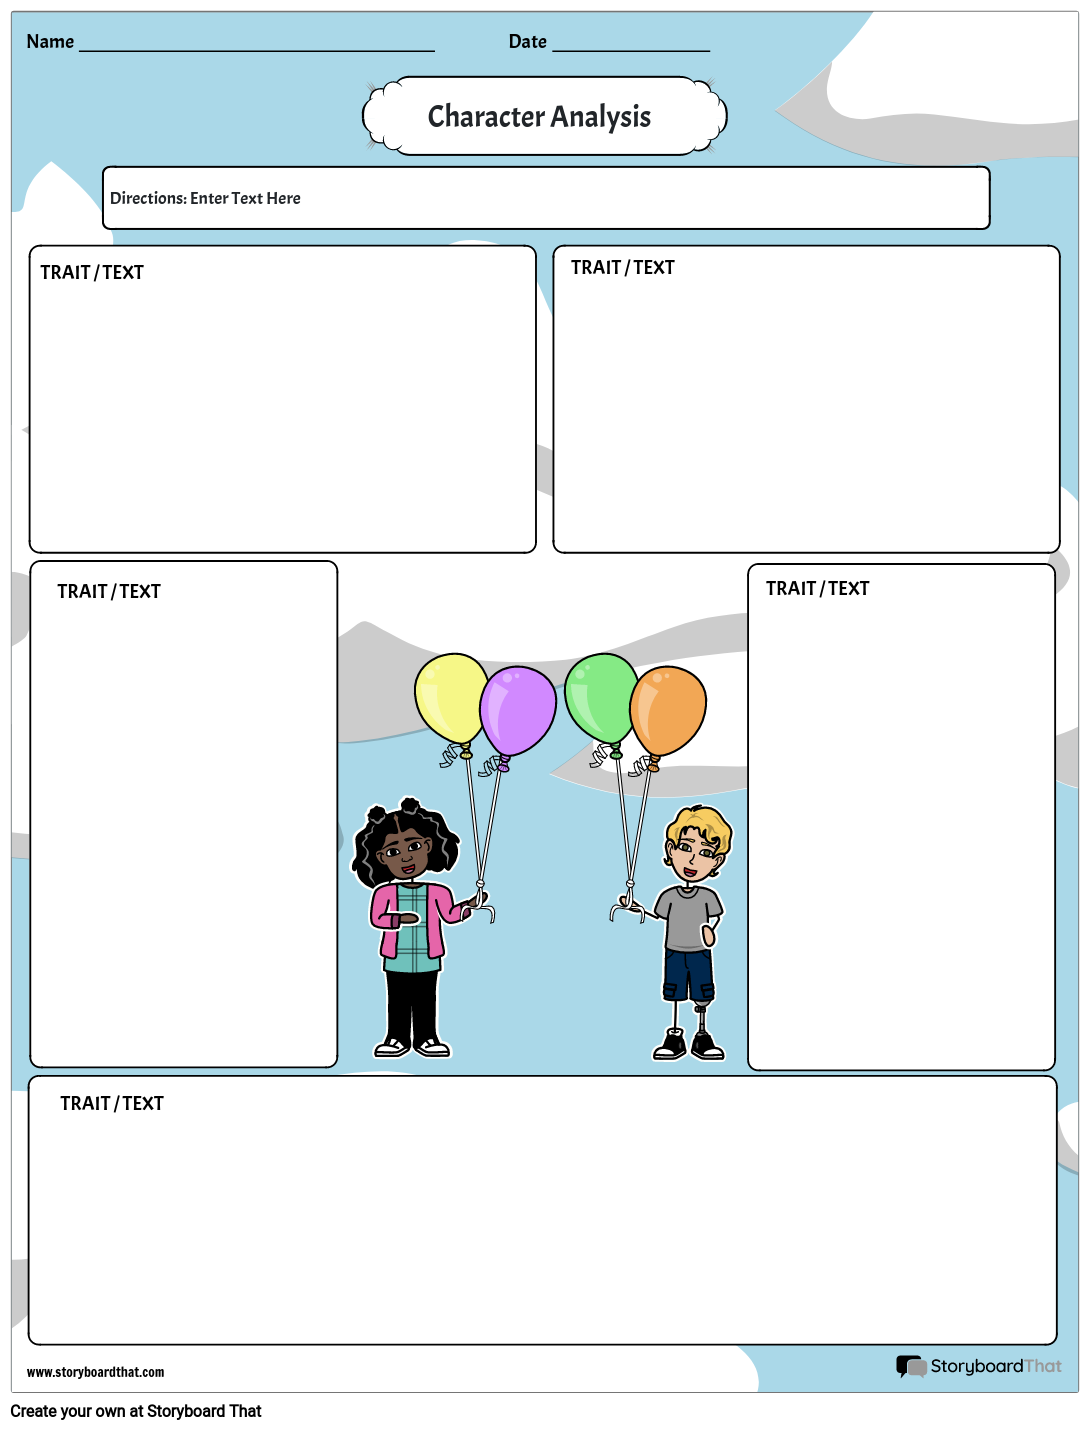 Character Analysis Template with Kids and Balloons